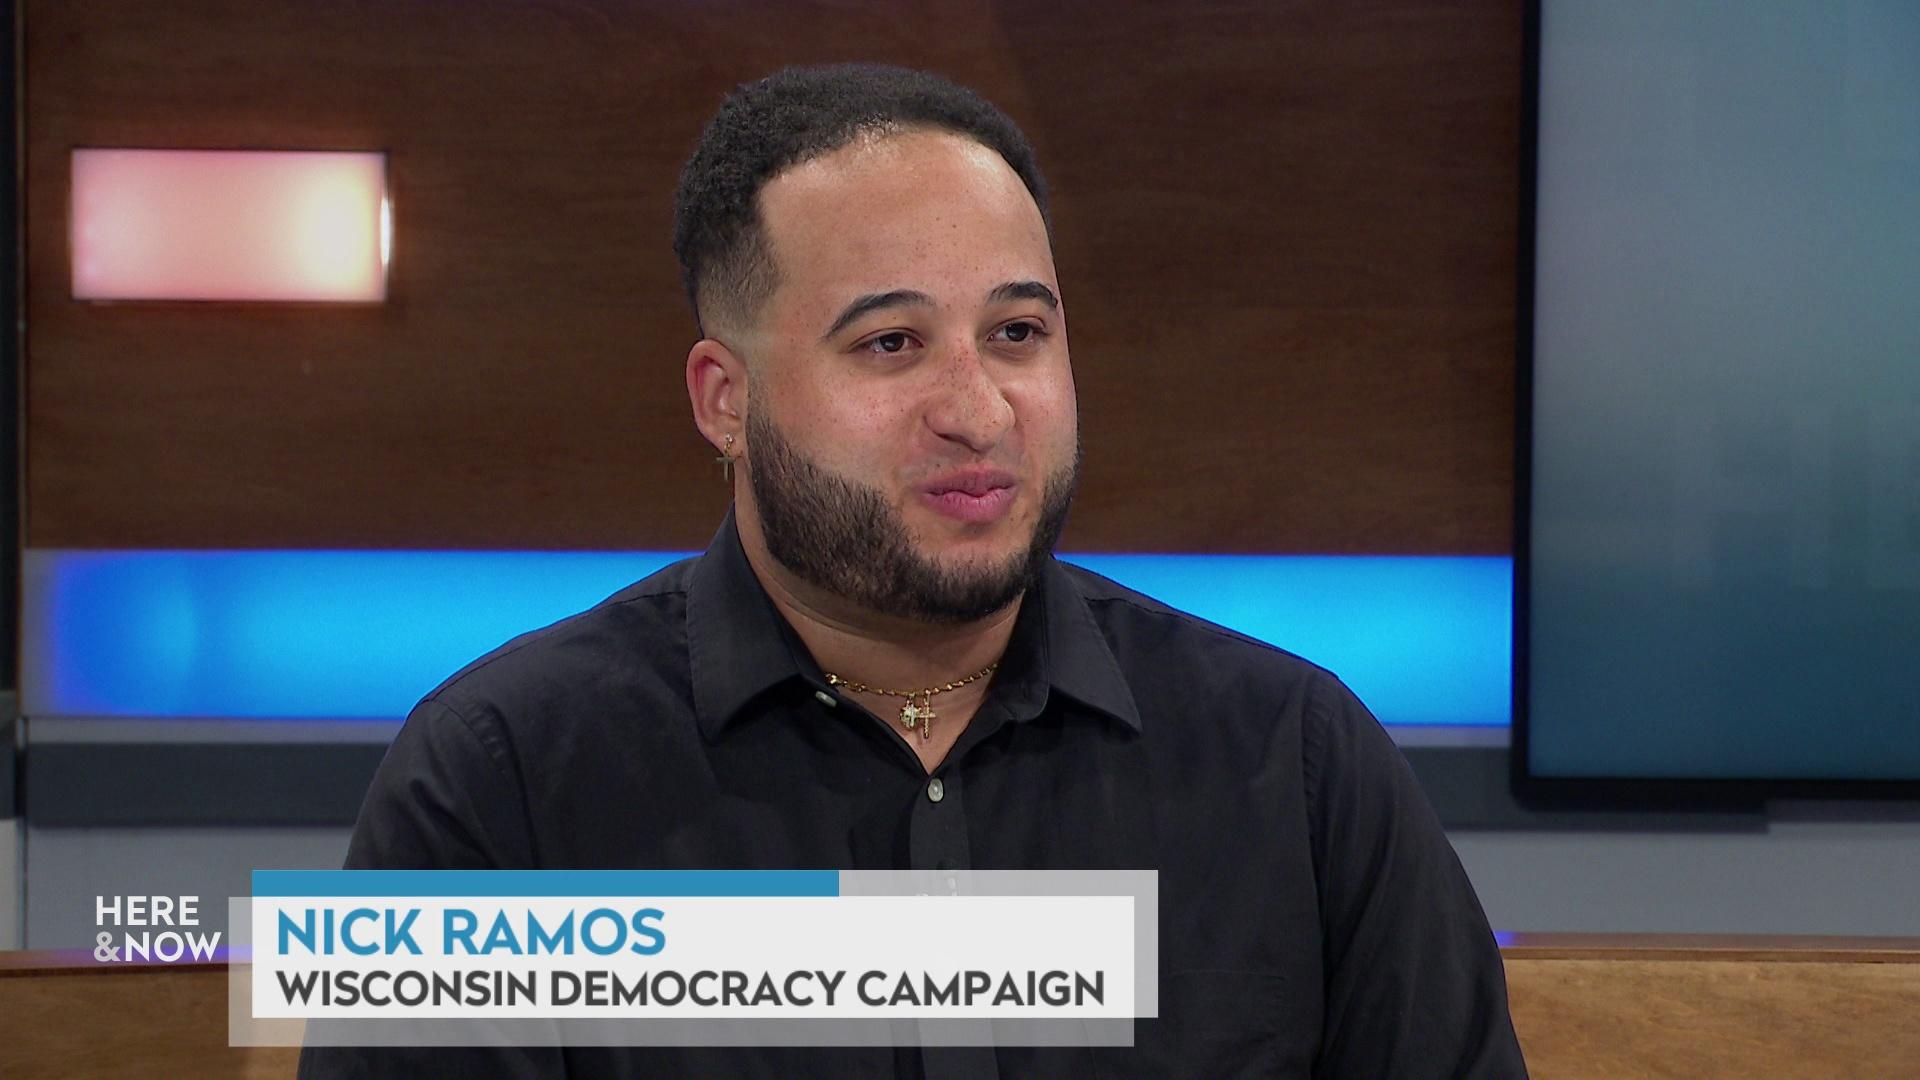 Nick Ramos sits at the 'Here & Now' set featuring wood paneling, with a graphic at bottom reading 'Nick Ramos' and 'Wisconsin Democracy Campaign.'